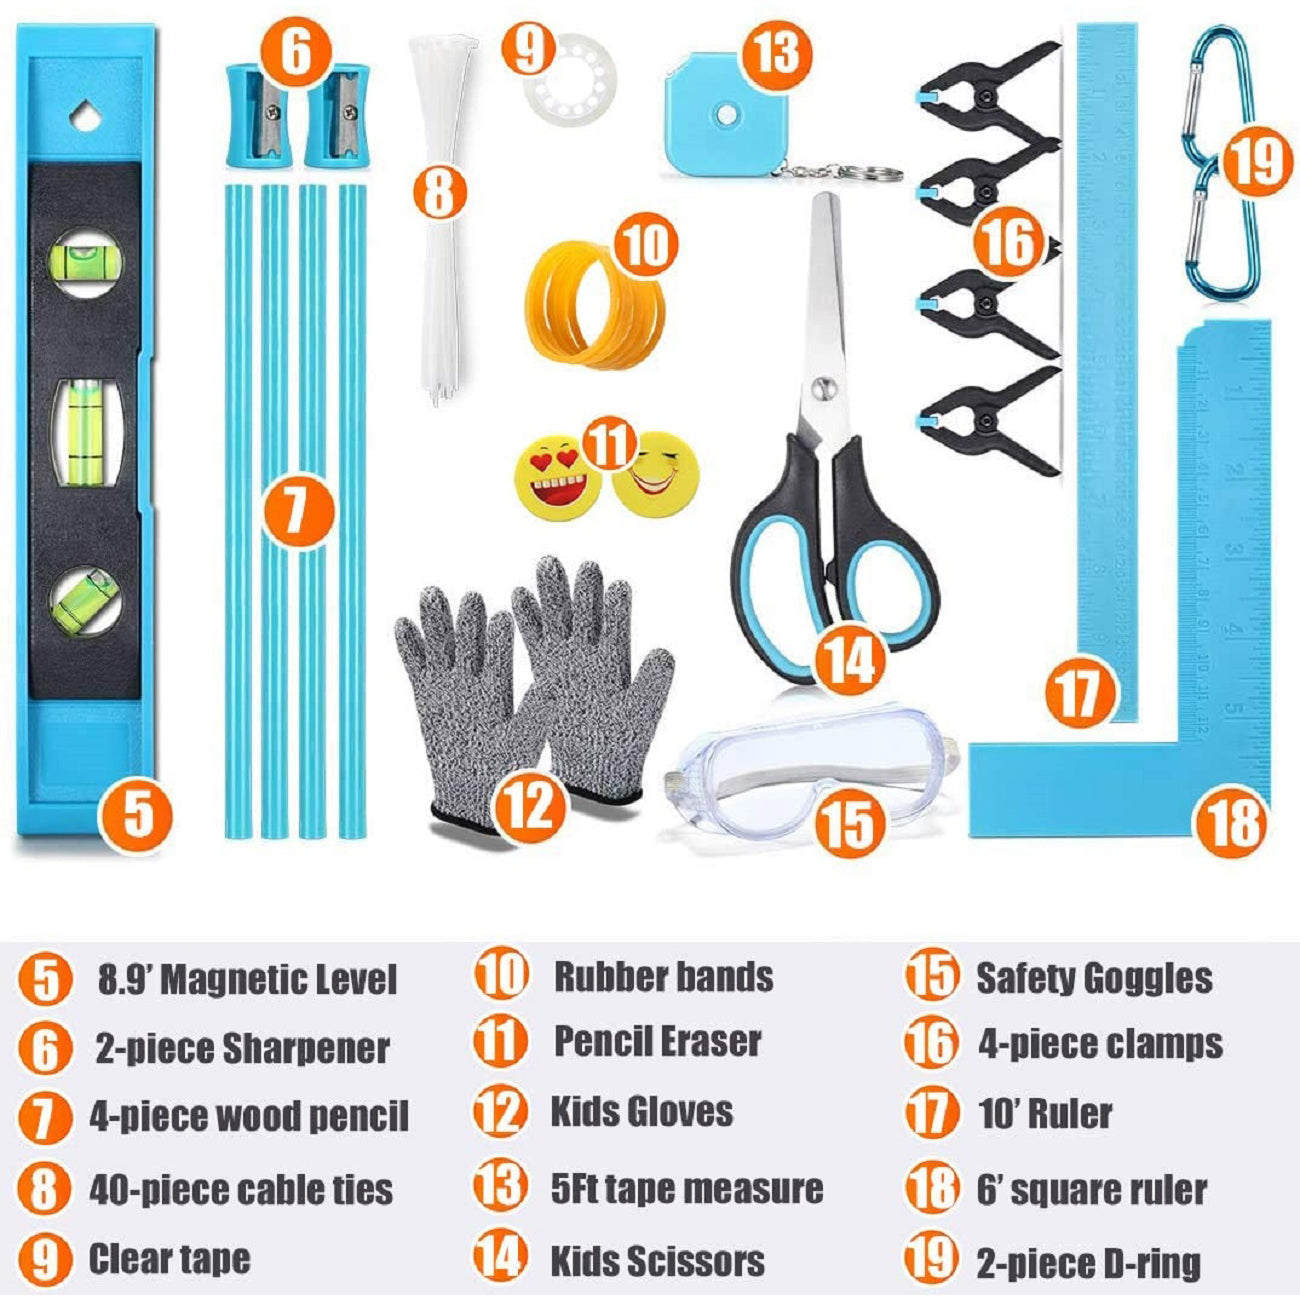 REXBETI 18pcs Young Builder's Tool Set with Real Hand Tools, Reinforced  Kids Tool Belt, Waist 20-32, Kids Learning Tool Kit for Home DIY and